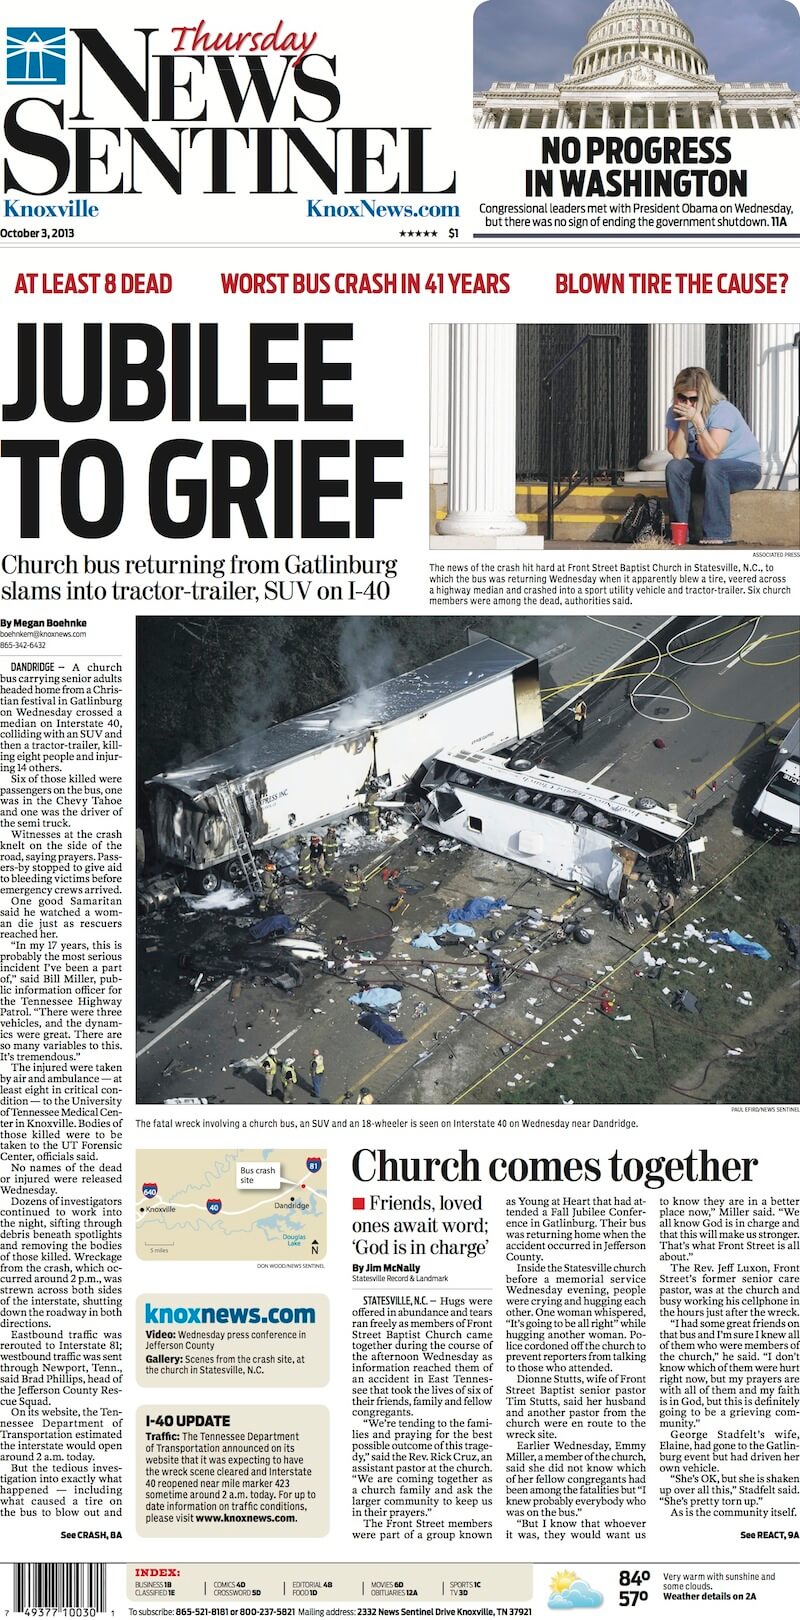 Indiana Newspapers 32 The News Sentinel